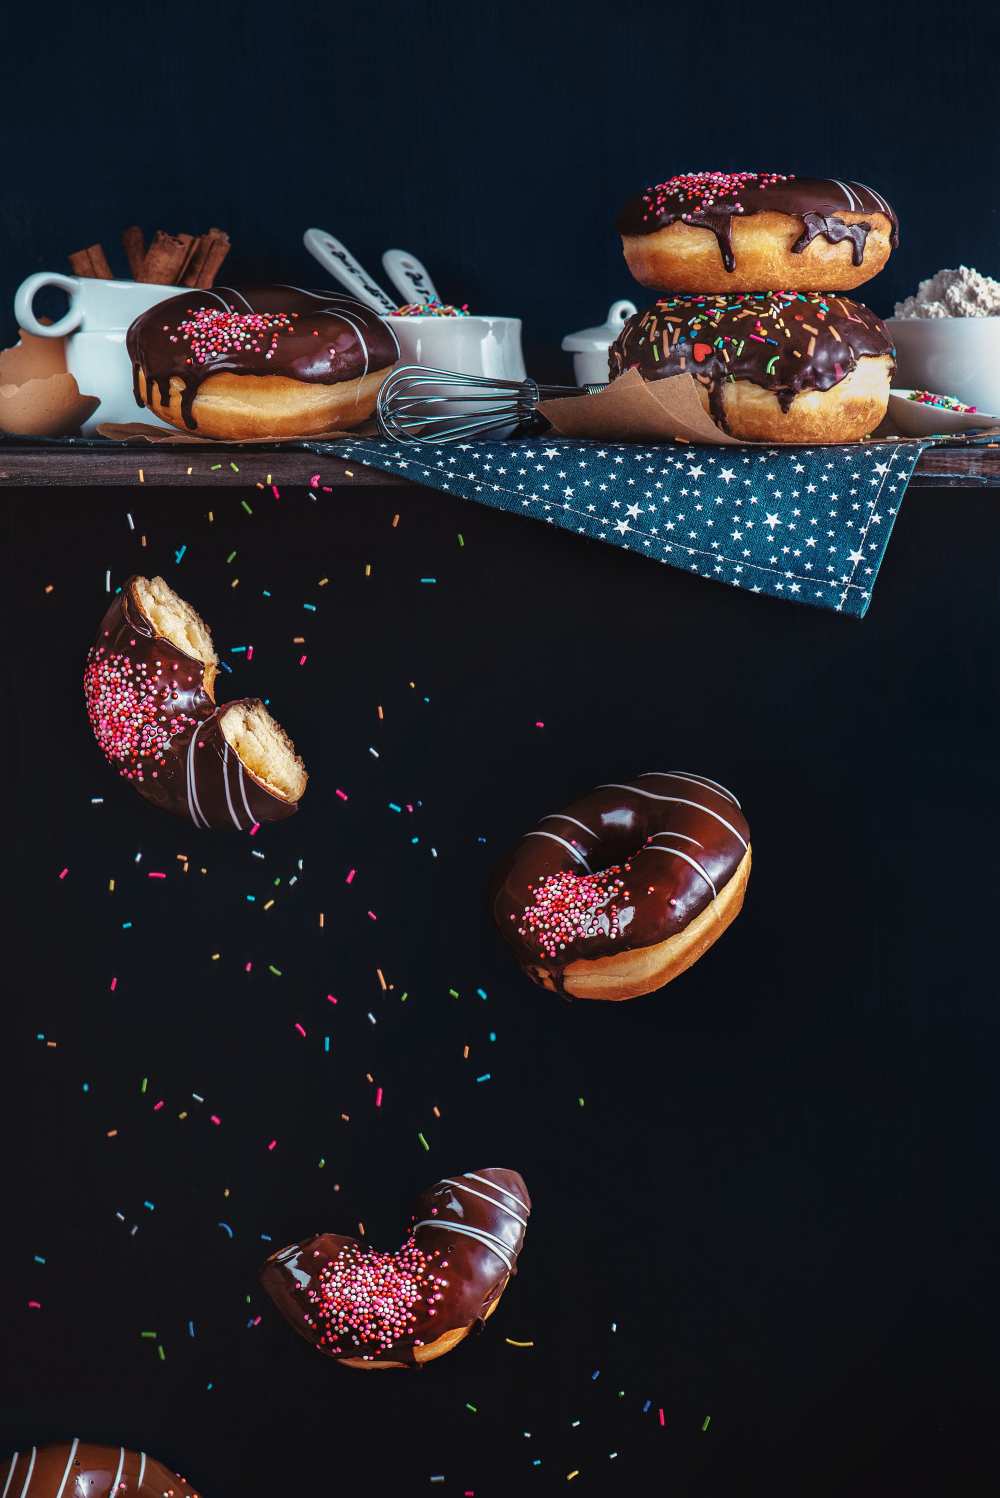 Donuts from the top shelf from Dina Belenko